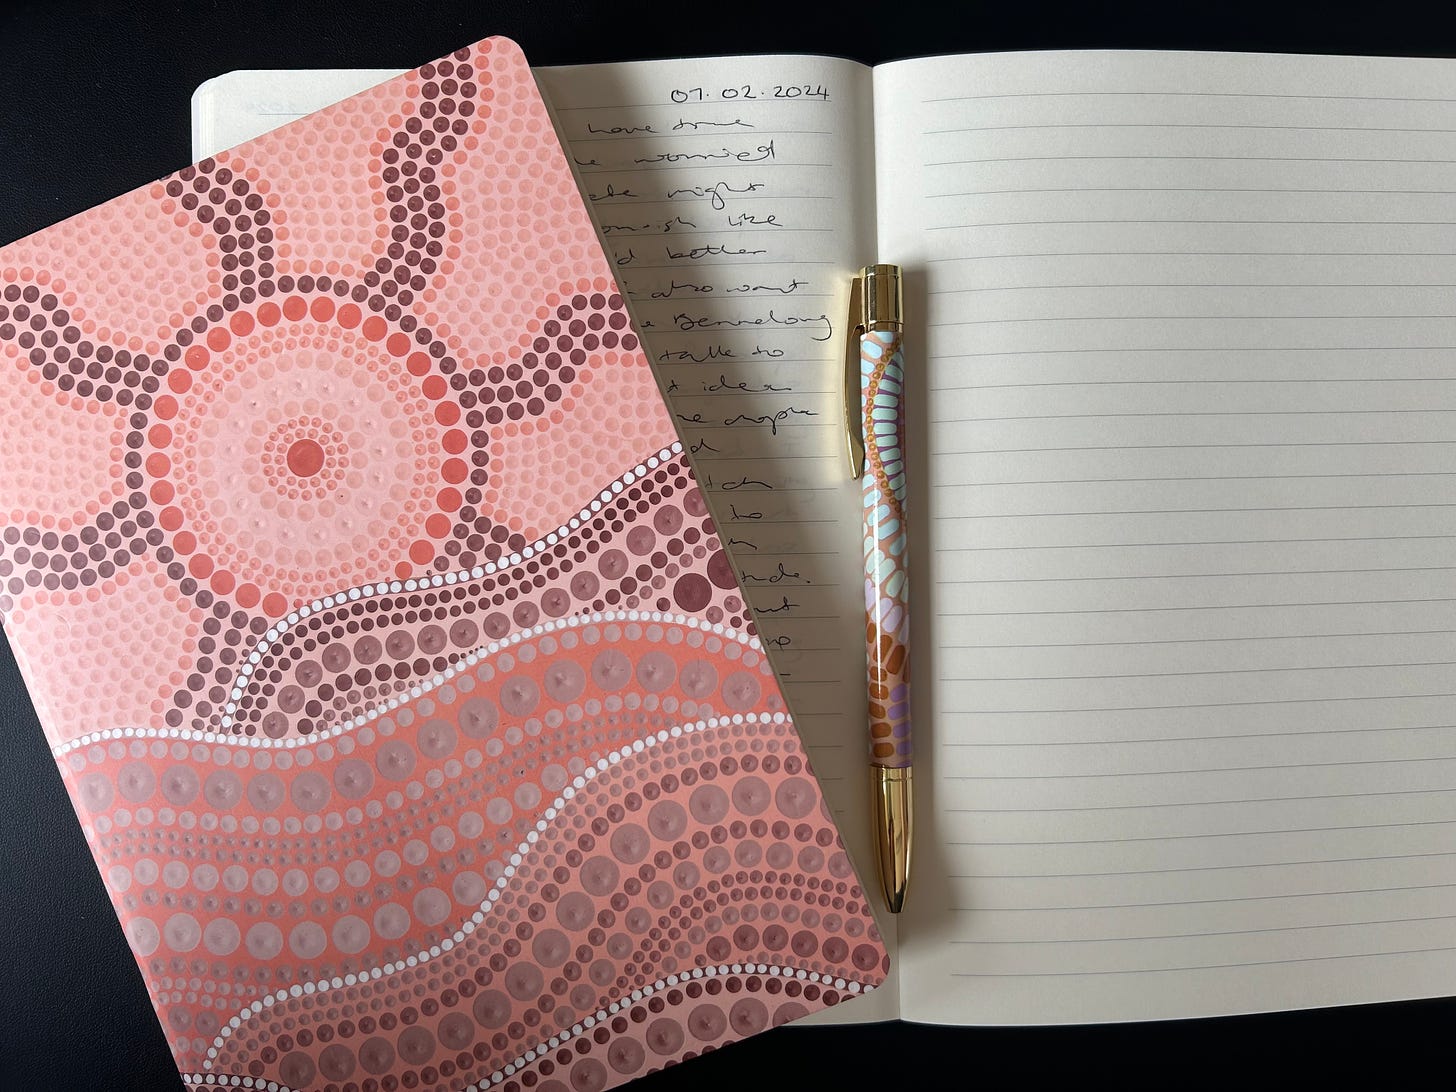 Two notebooks, one with the cover showing an Aboriginal dot painting design, the other open underneath partially showing some writing.